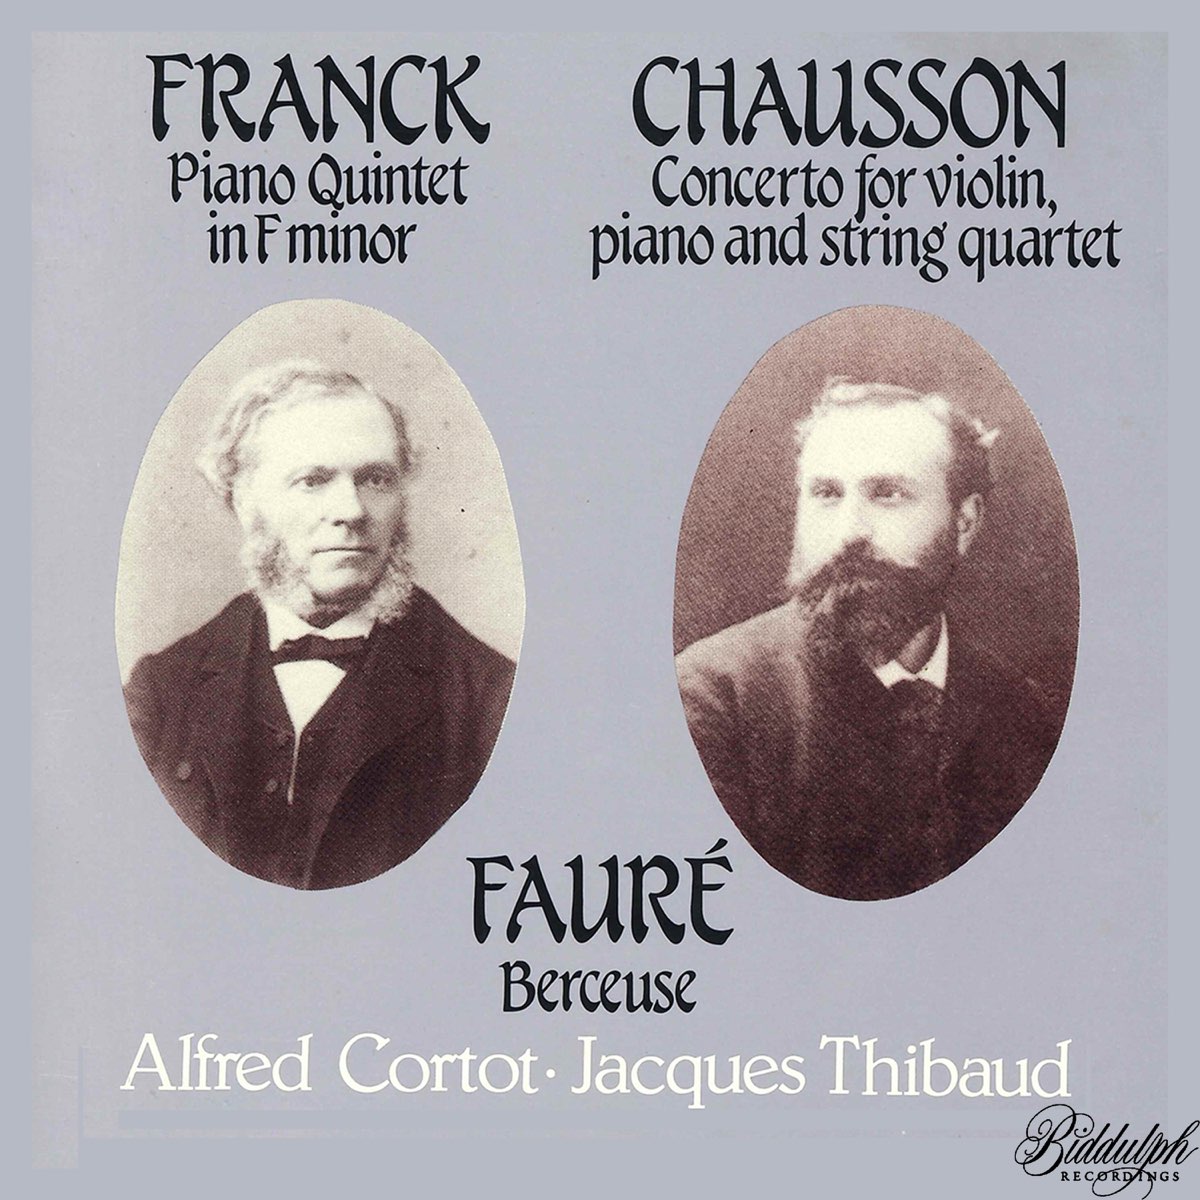 Franck, Chausson & Fauré: Chamber Works by Jacques Thibaud & Alfred Cortot  on Apple Music